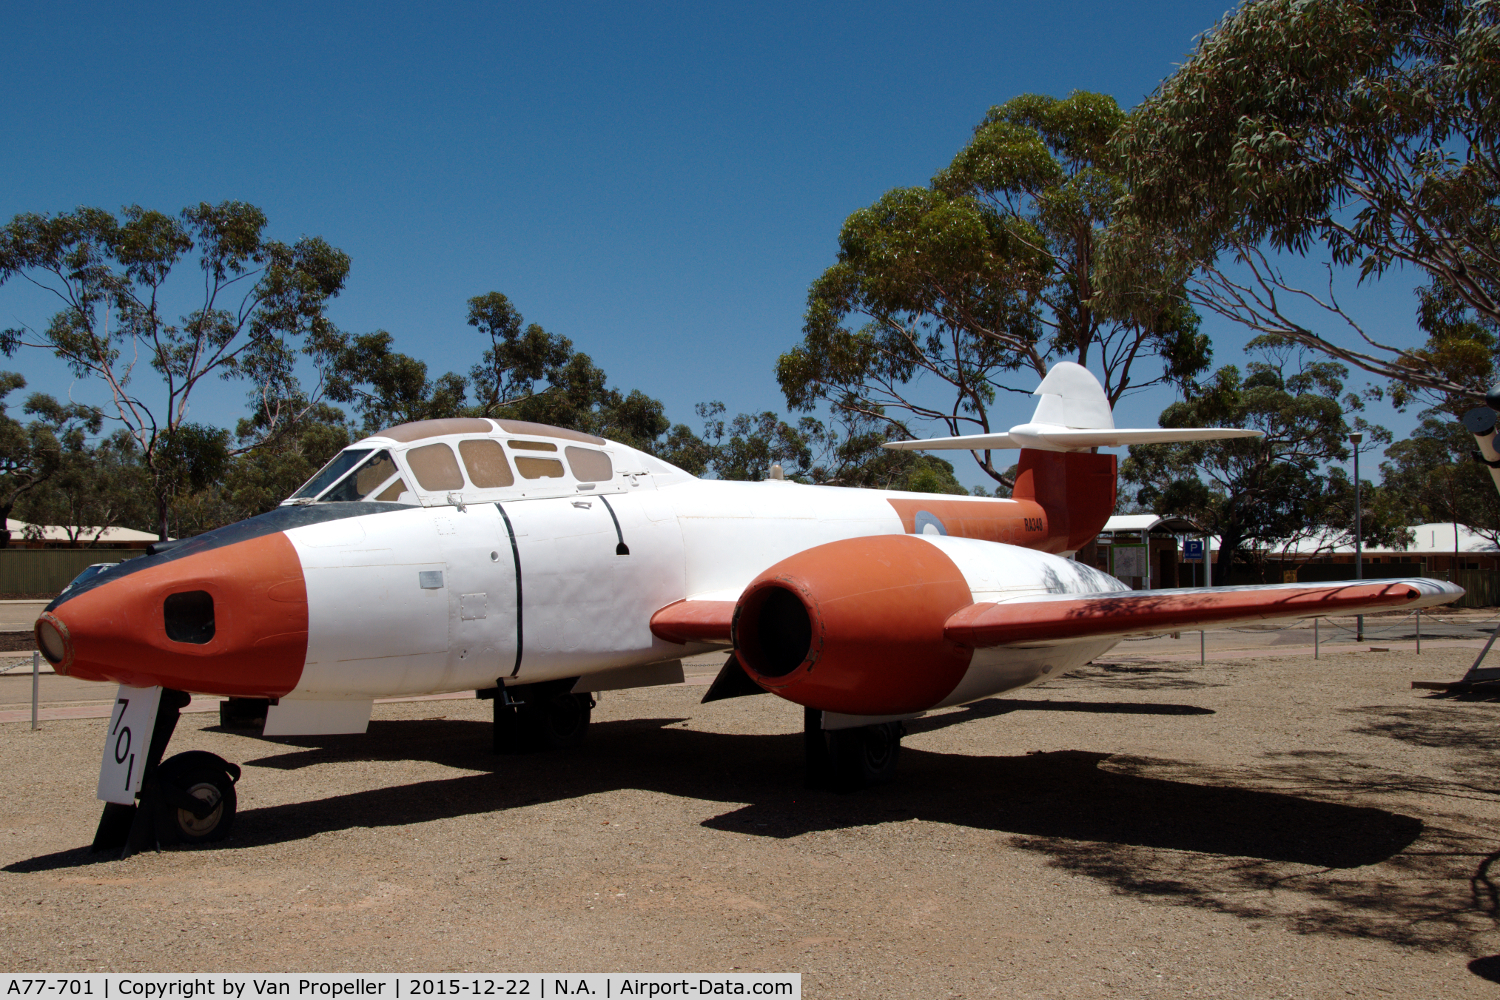 A77-701, 1950 Gloster Meteor T.7 C/N Not found WA731, RAAF Gloster Meteor T.Mk.7 preserved at the Woomera Missile Park, South Australia